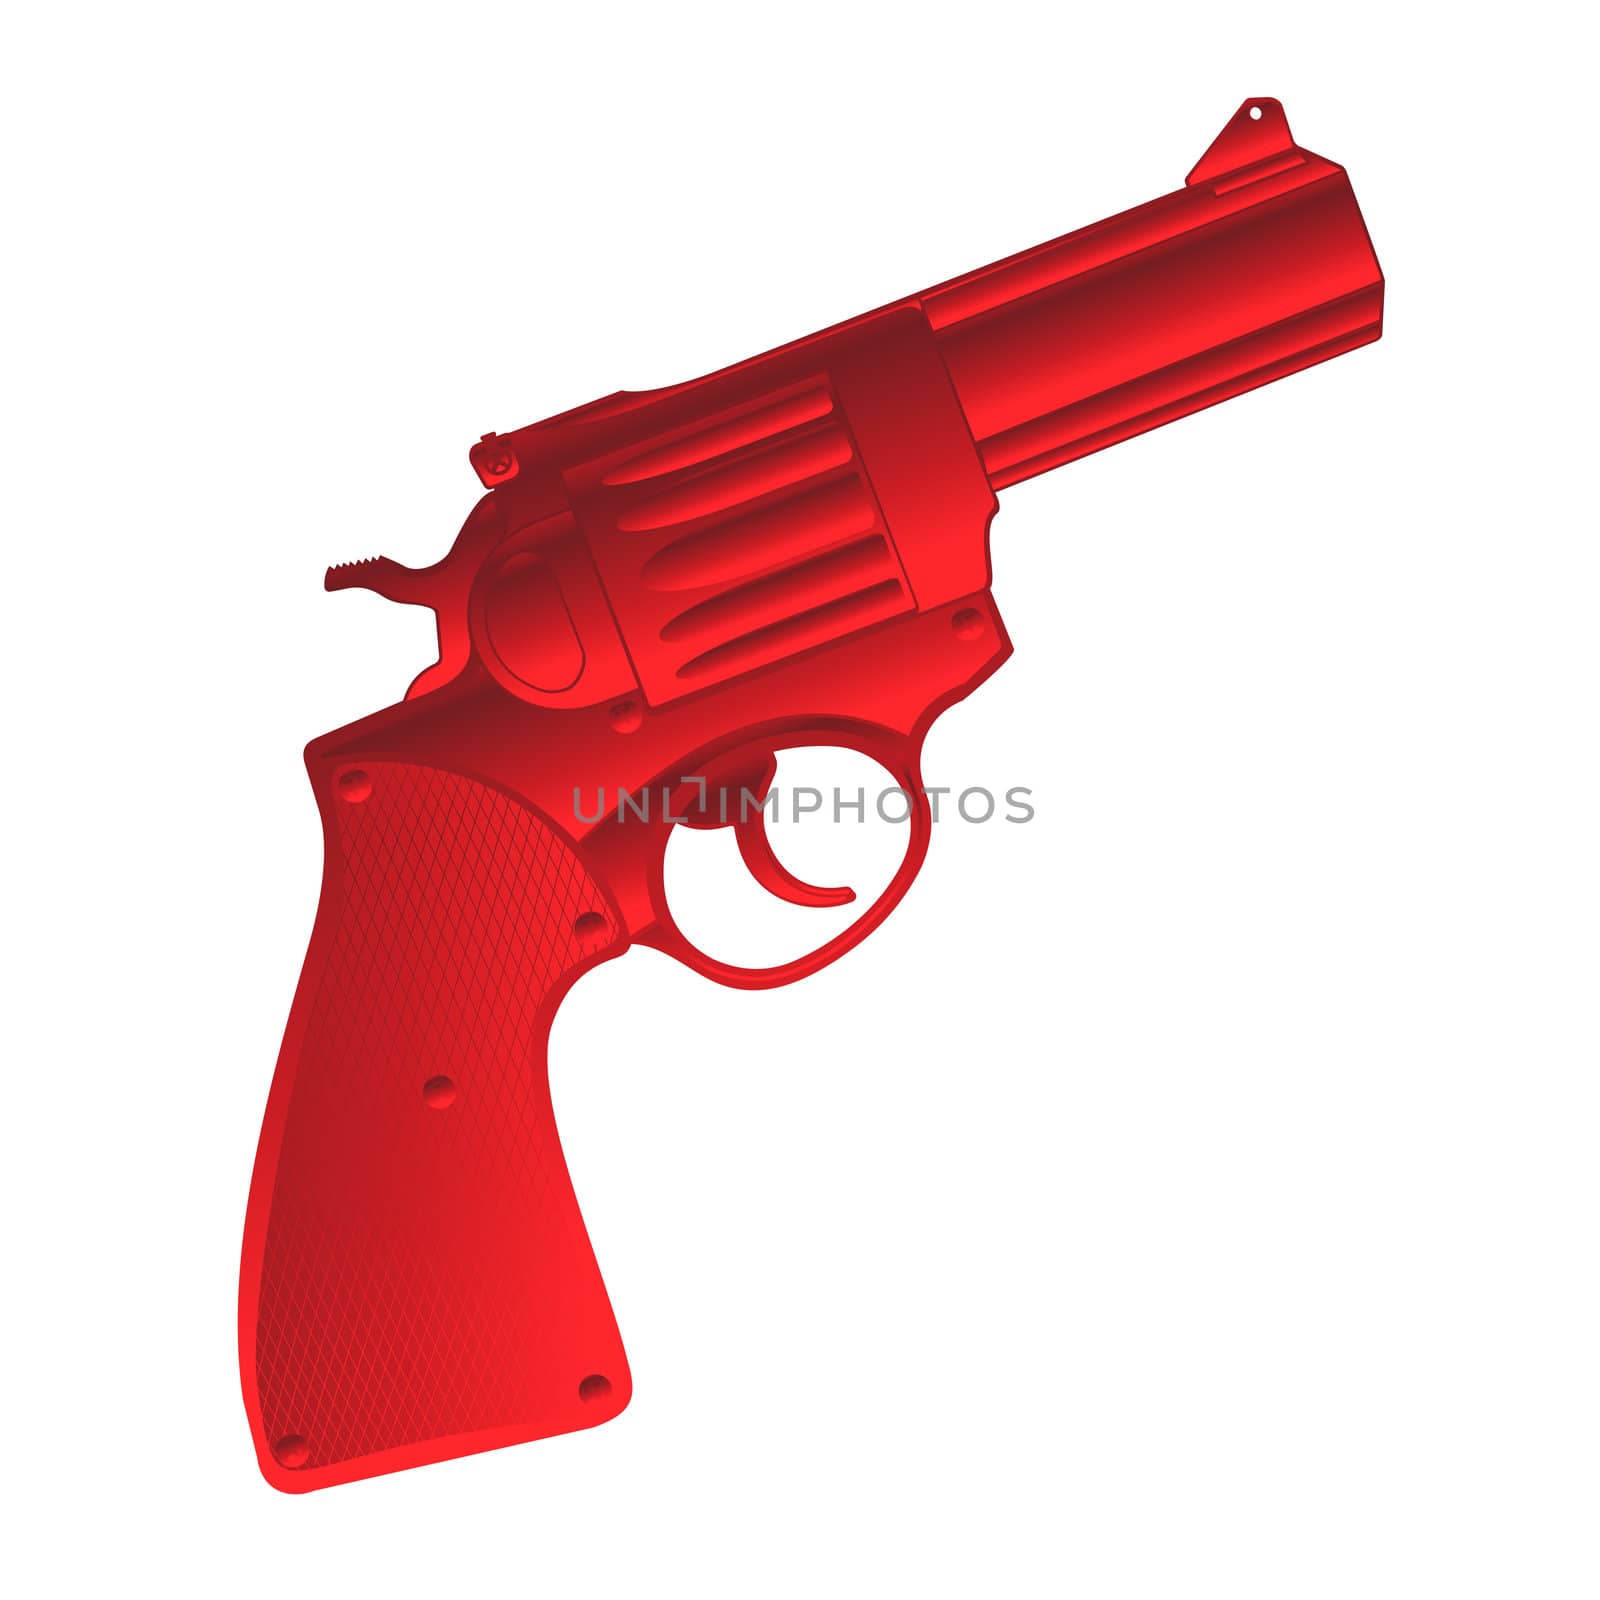 Red pistol, isolated object over white background